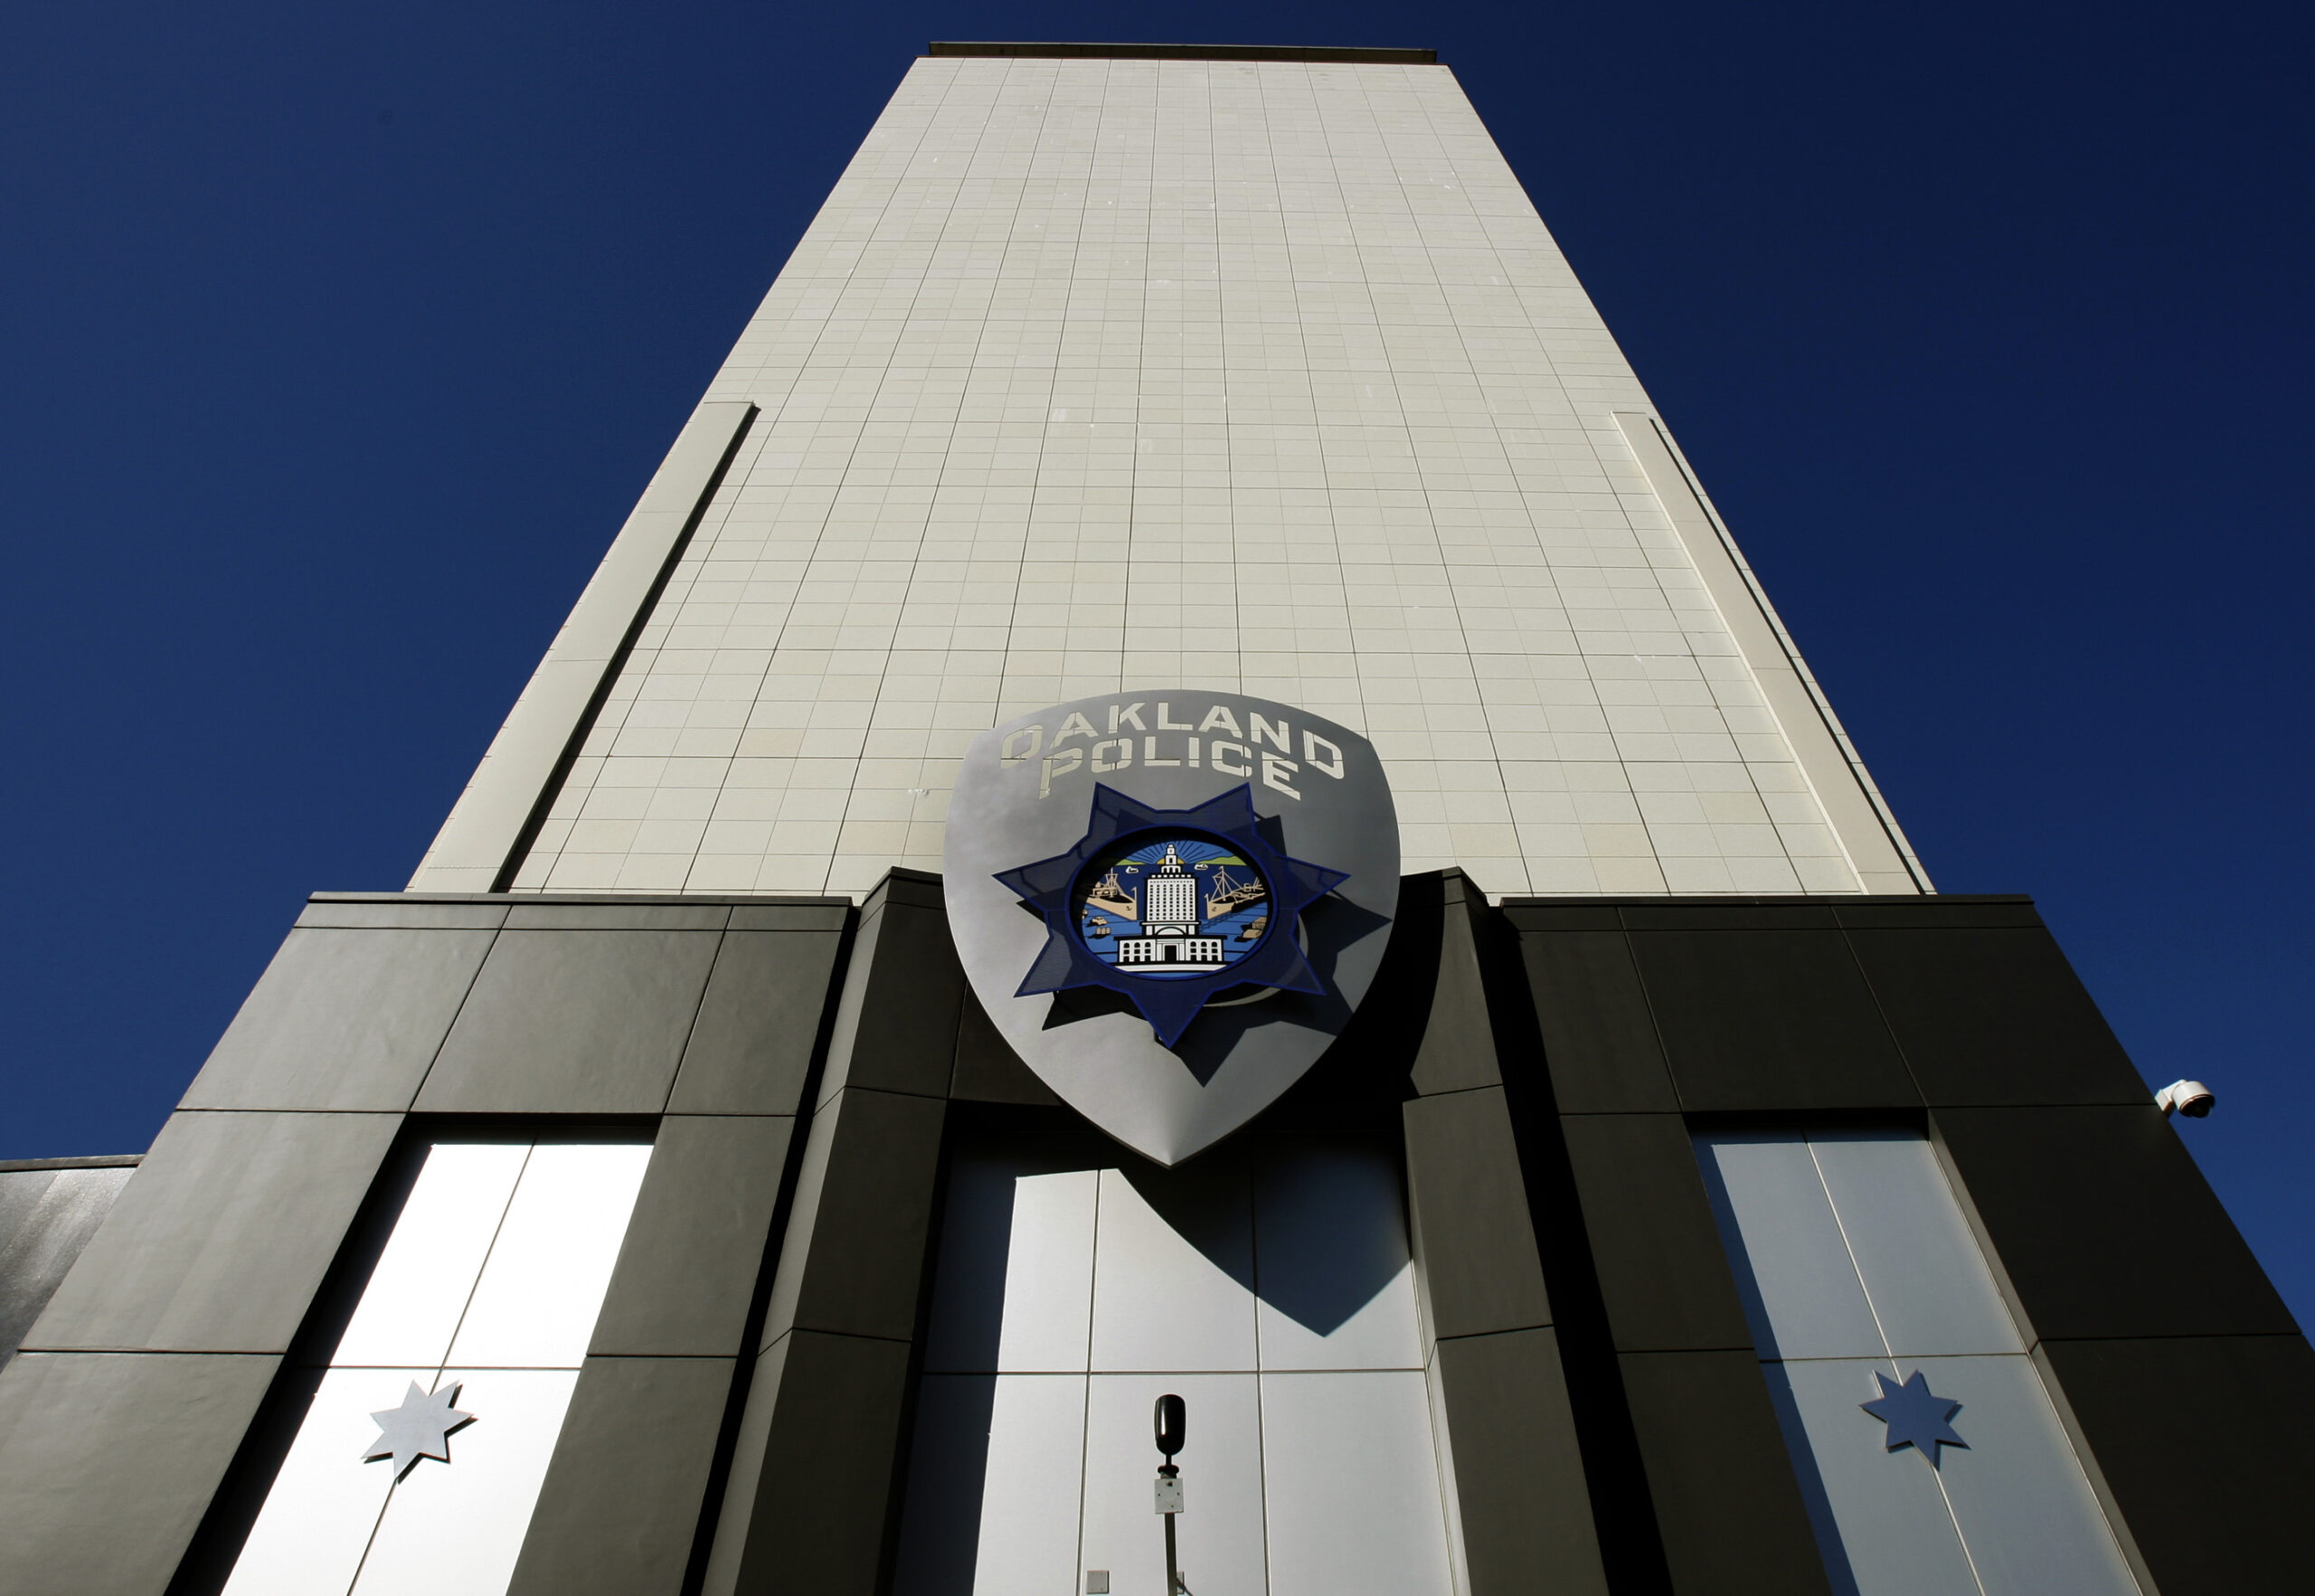 A multi-story administration building with an Oakland police shield affixed to its exterior stands against dark blue skies in direct sunlight.